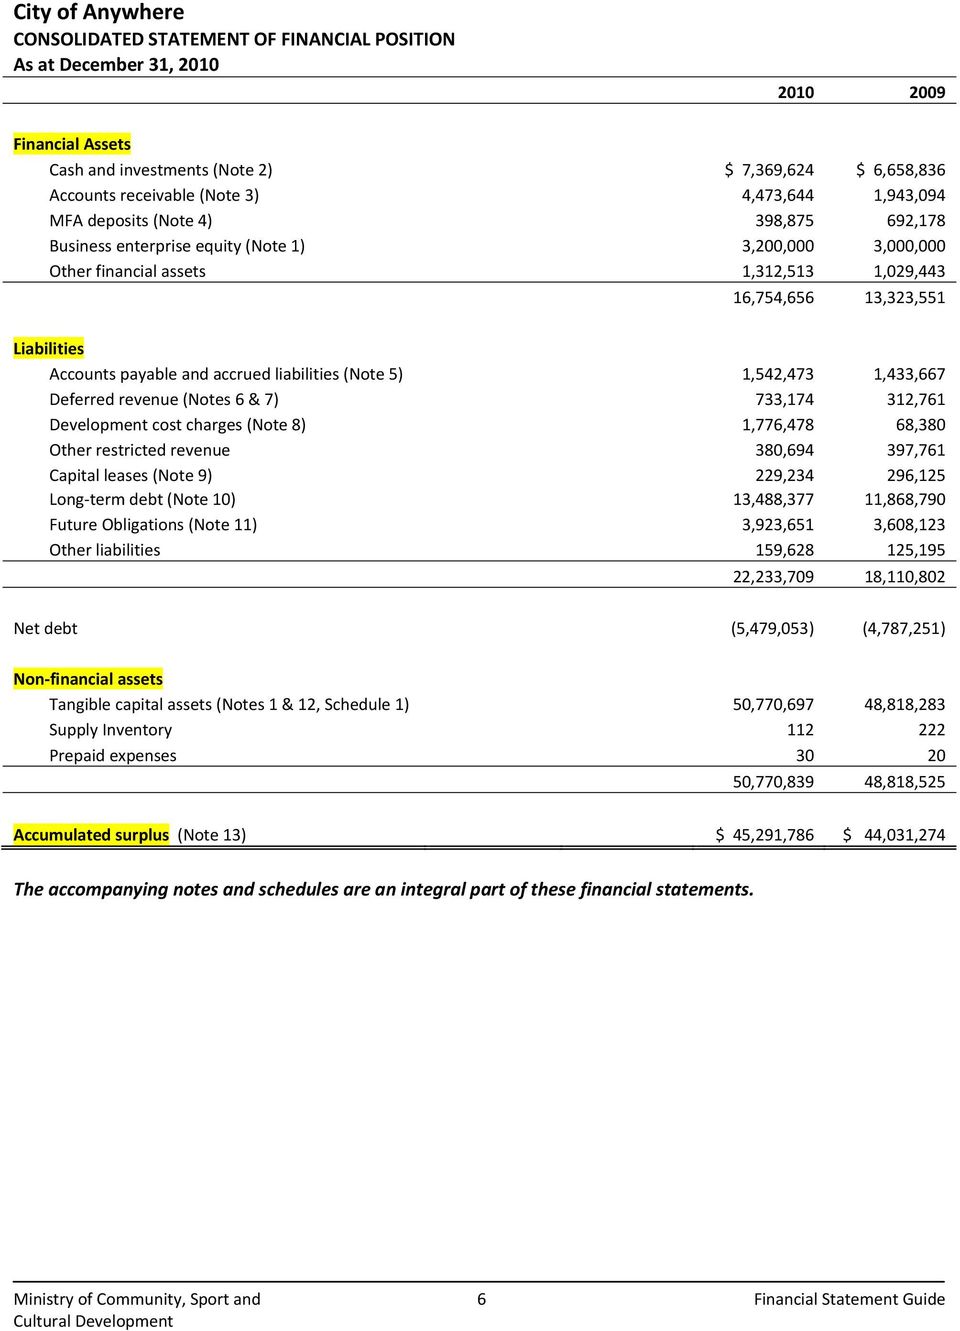 payable and accrued liabilities (Note 5) 1,542,473 1,433,667 Deferred revenue (Notes 6 & 7) 733,174 312,761 Development cost charges (Note 8) 1,776,478 68,380 Other restricted revenue 380,694 397,761